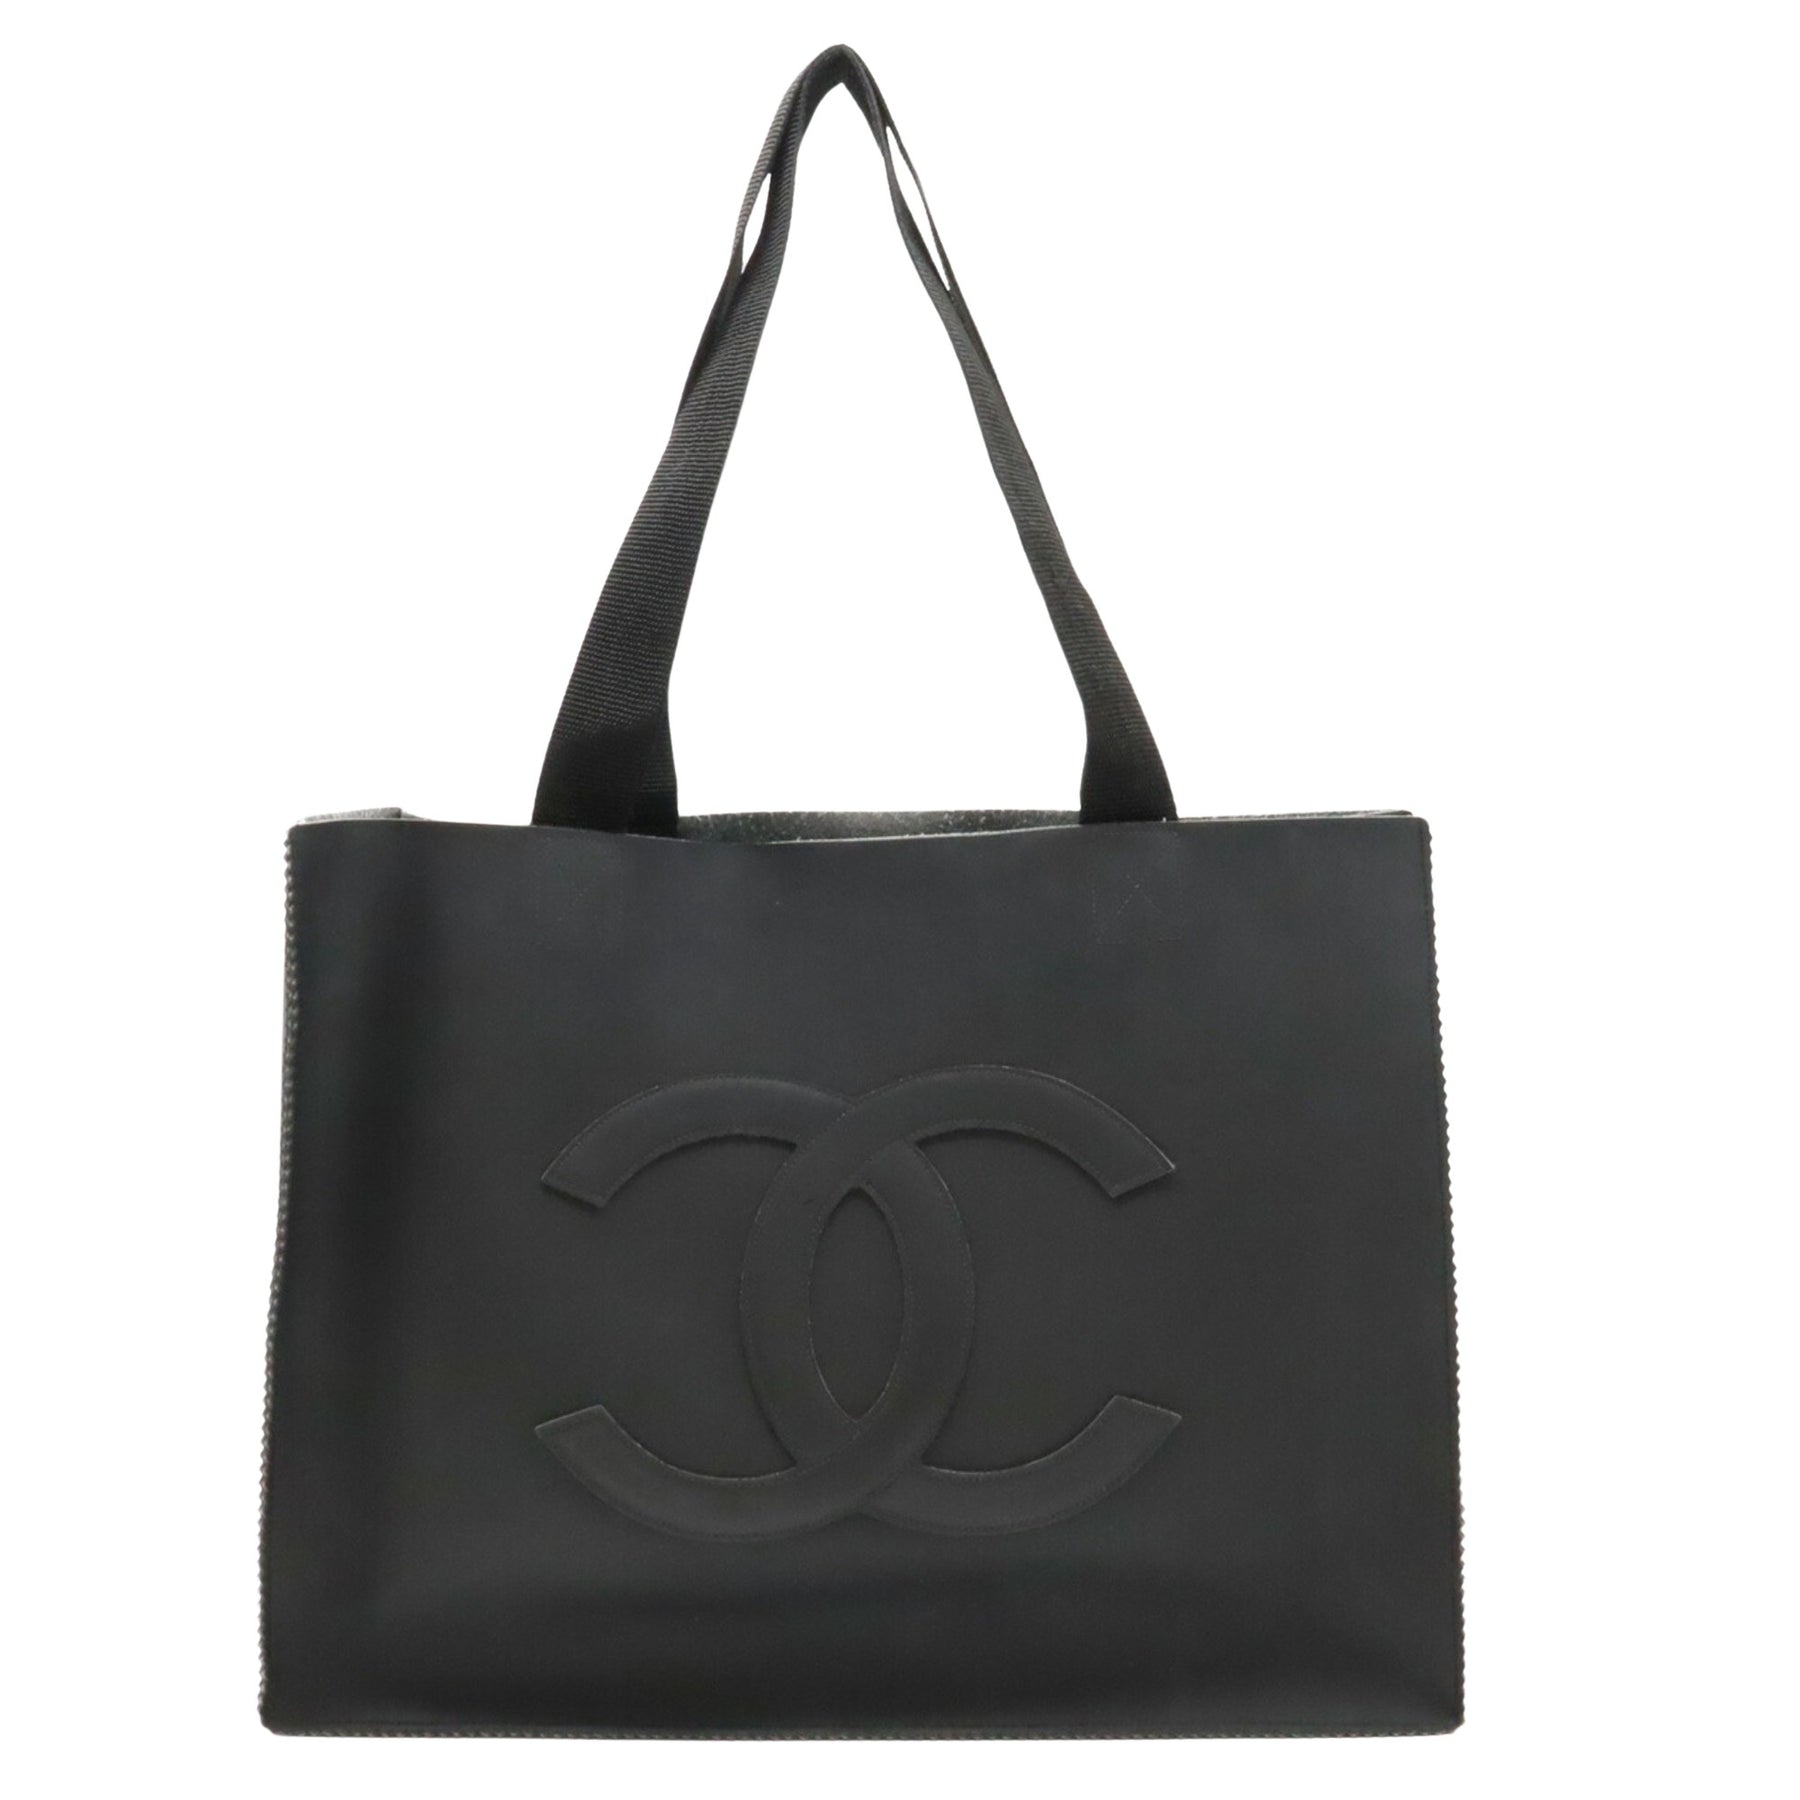 Chanel Rubber Bag - 24 For Sale on 1stDibs  chanel rubber tote, chanel  miscellaneous bag, rubber bag middle layer